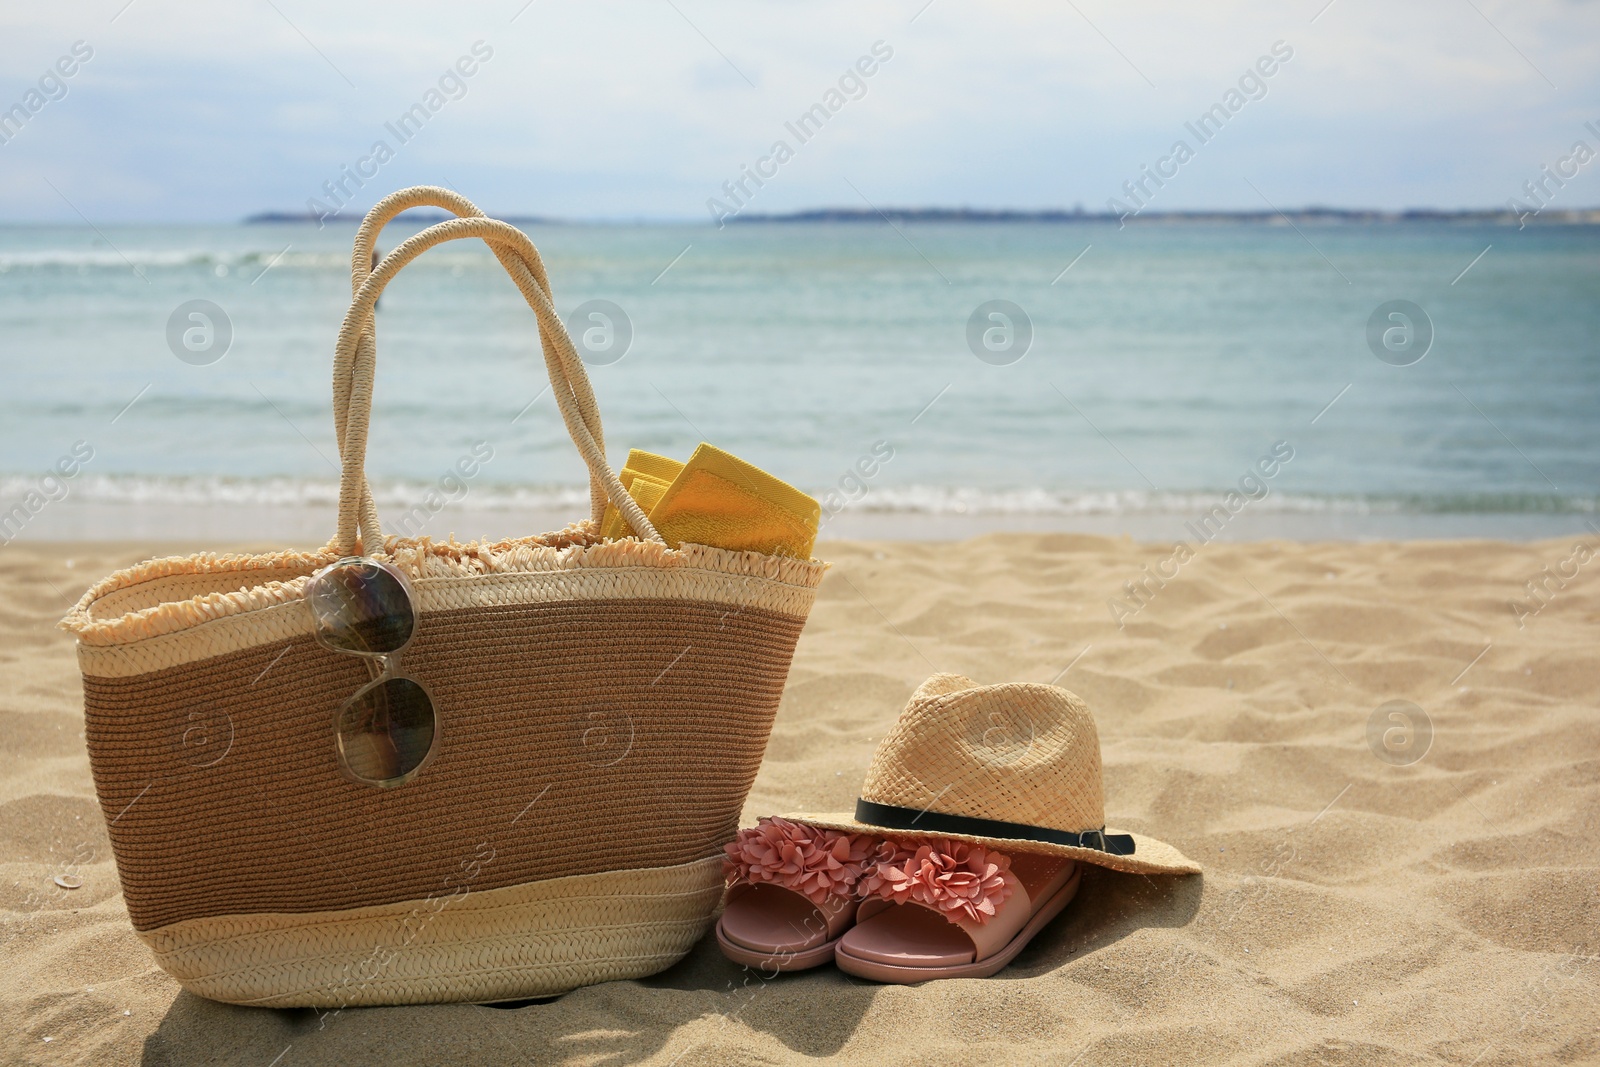 Photo of Bag, slippers and other beach items on sandy seashore. Space for text